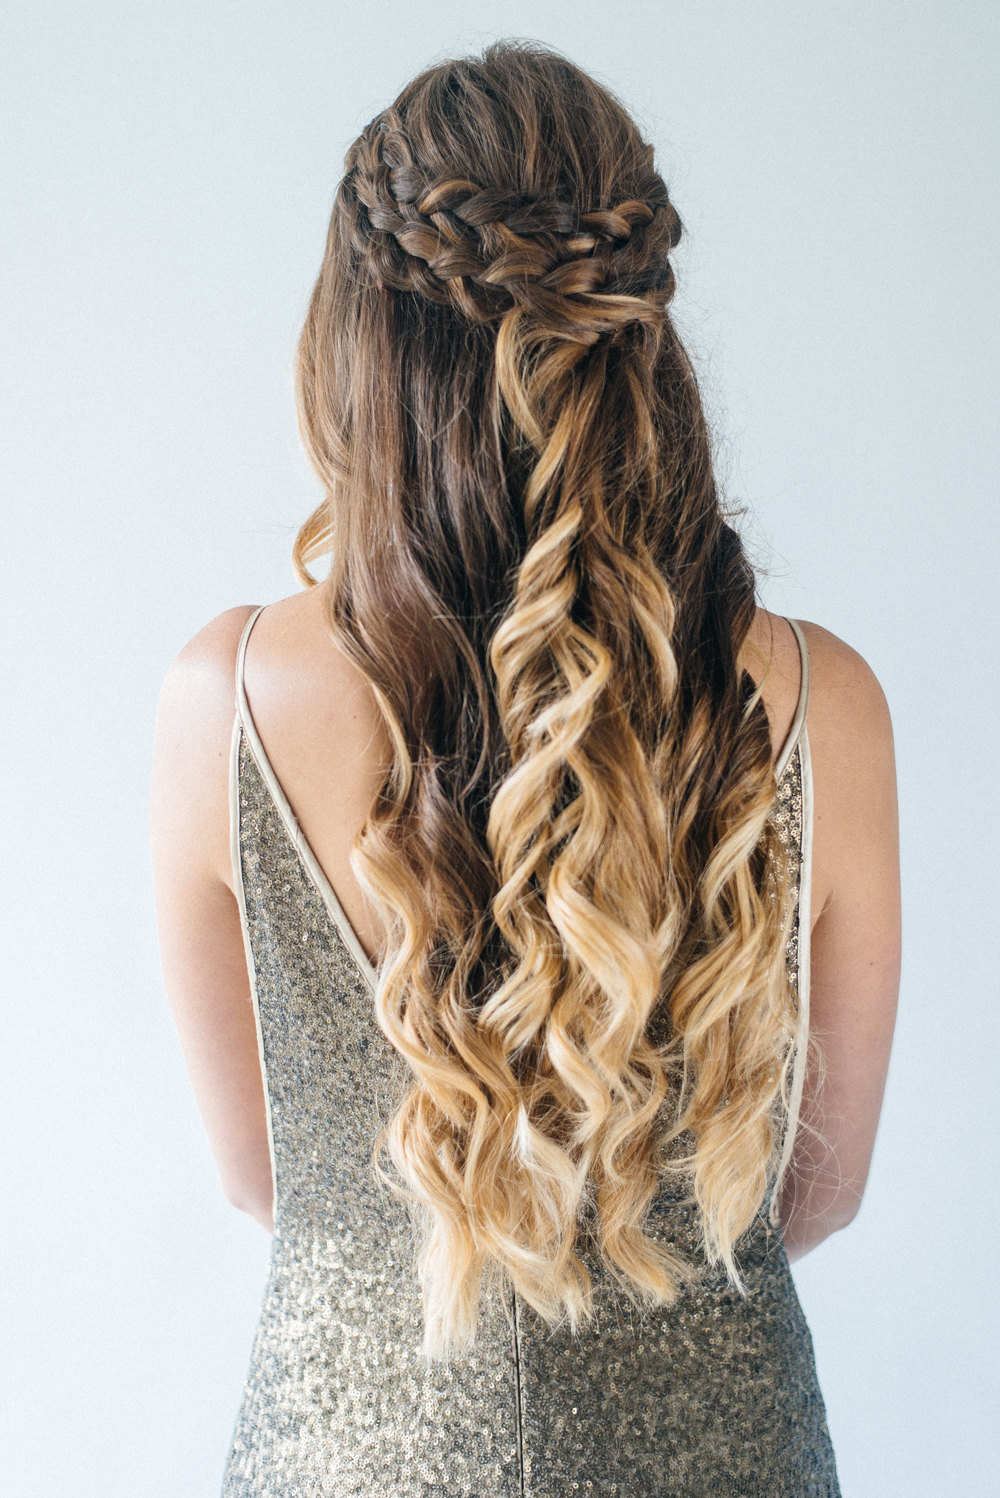 Inspiration For Half Up Half Down Wedding Hair With Tousled Waves